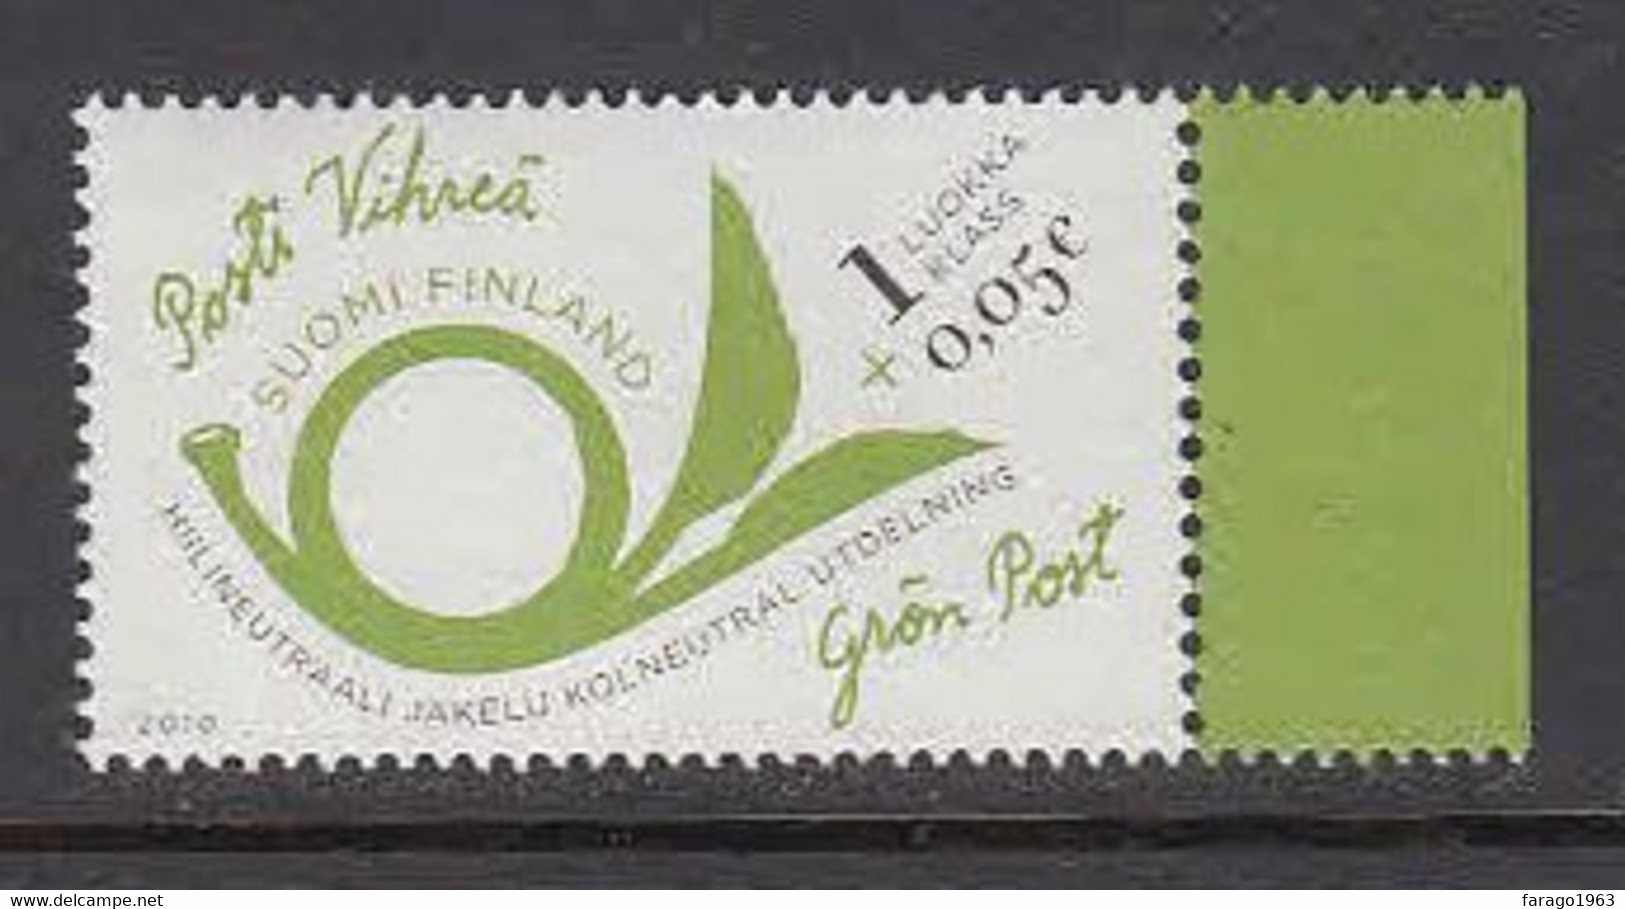 2010 Finland Green Energy Plant Semi Postal Environment Complete Pair MNH @ BELOW FACE VALUE - Unused Stamps